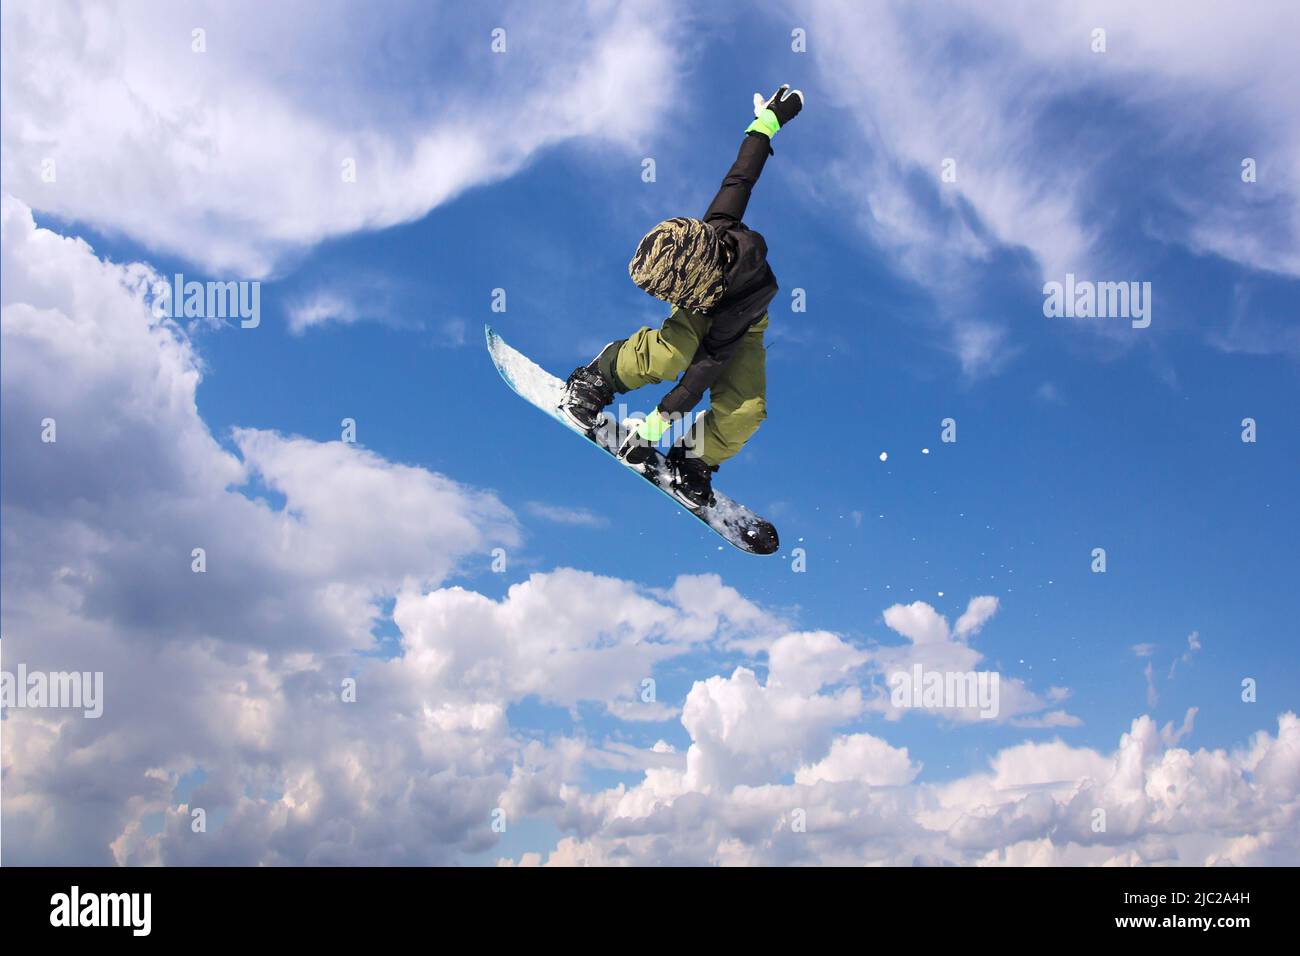 Snowboarder in action, jumping against blue sky Stock Photo